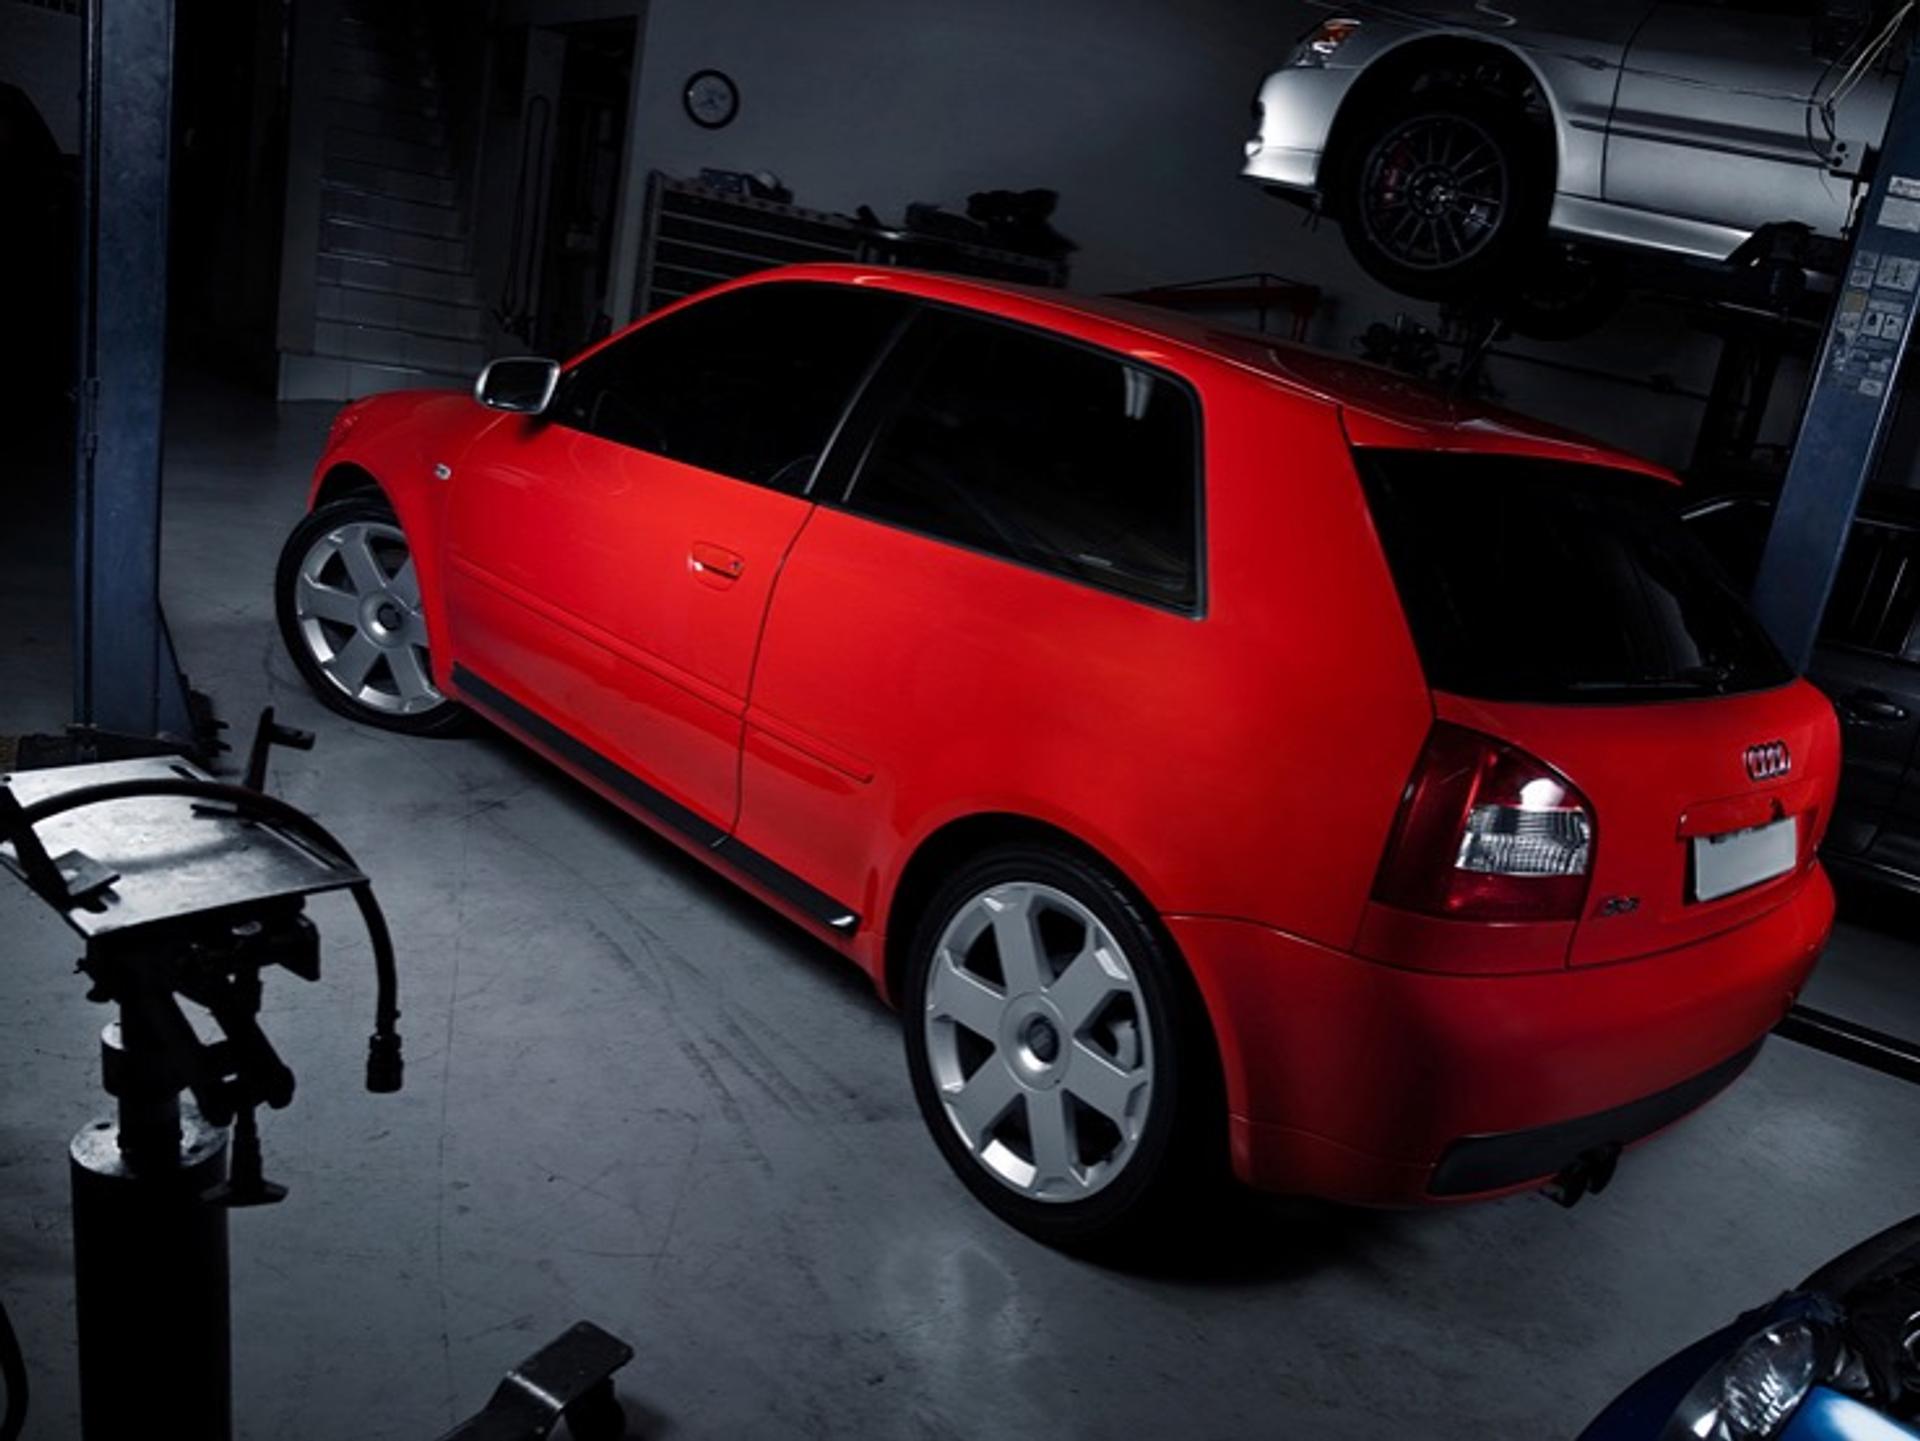 Red Audi A3 parked in a repair shop